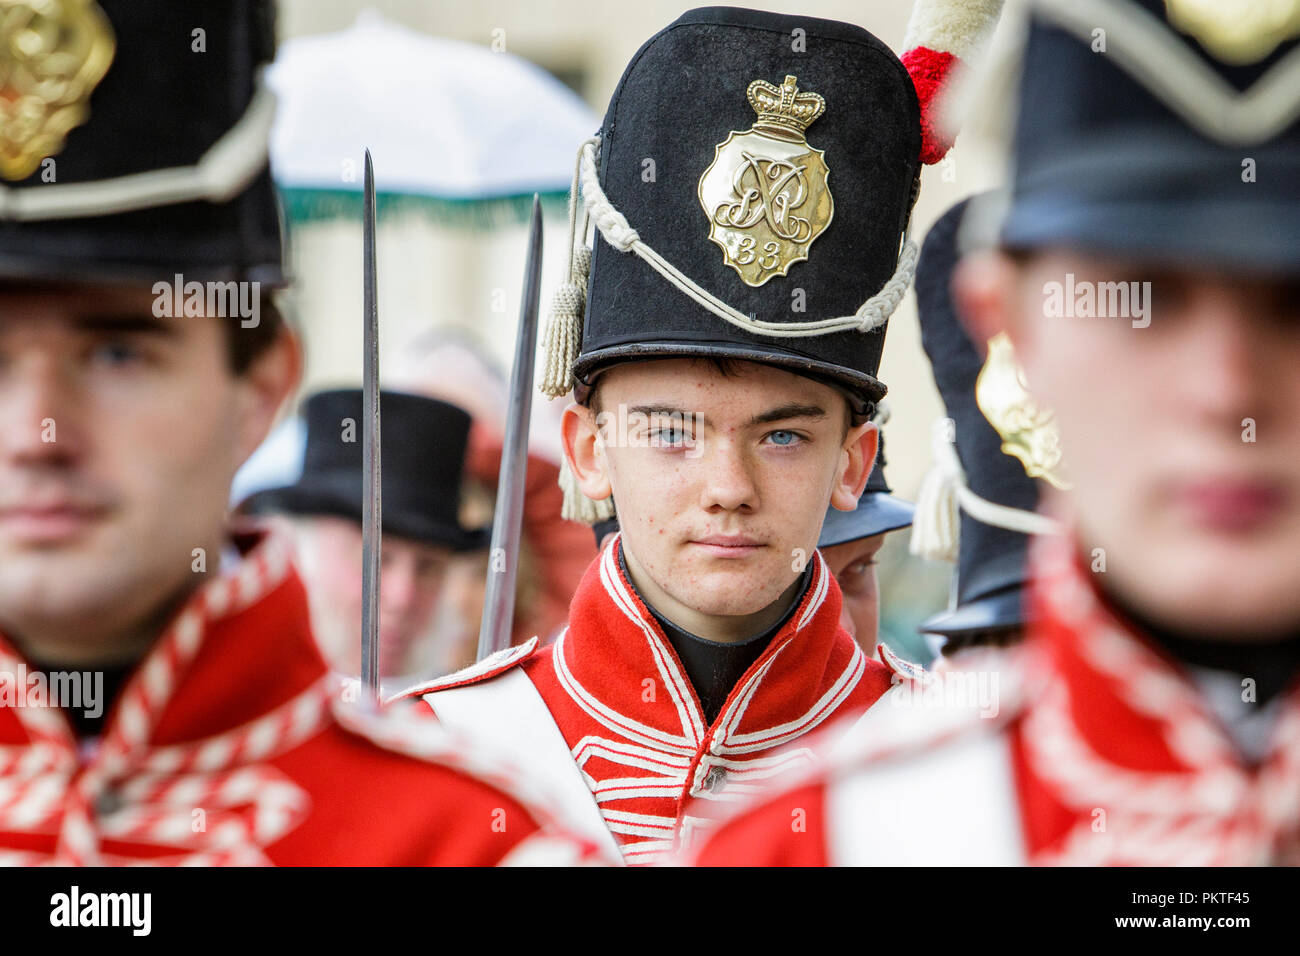 Bath, UK. 15th Sep, 2018. Members of the 33rd Regiment Of Foot are pictured taking part in the world famous Grand Regency Costumed Promenade. The Promenade, part of the Jane Austen Festival is a procession through the streets of Bath and the participants who come from all over the world dress in 18th Century costume. Credit:  Lynchpics/Alamy Live News Stock Photo